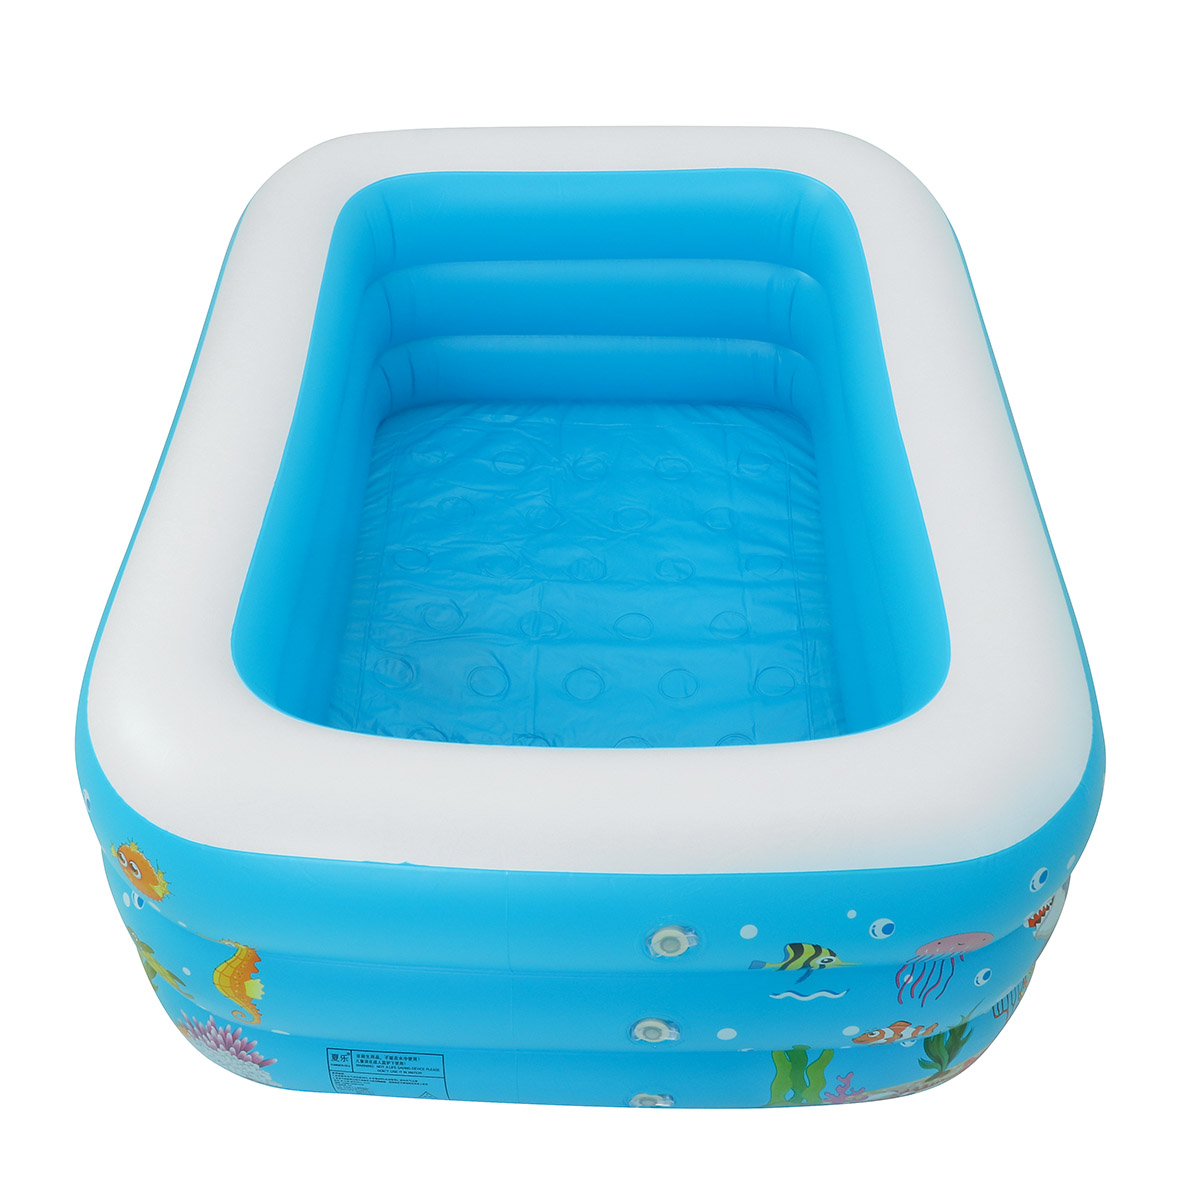 120-150CM-Family-Inflatable-Swimming-Pool-3-Ring-Thicken-Summer-Backyard-Inflate-Bathtub-for-Kids-Ad-1696845-15